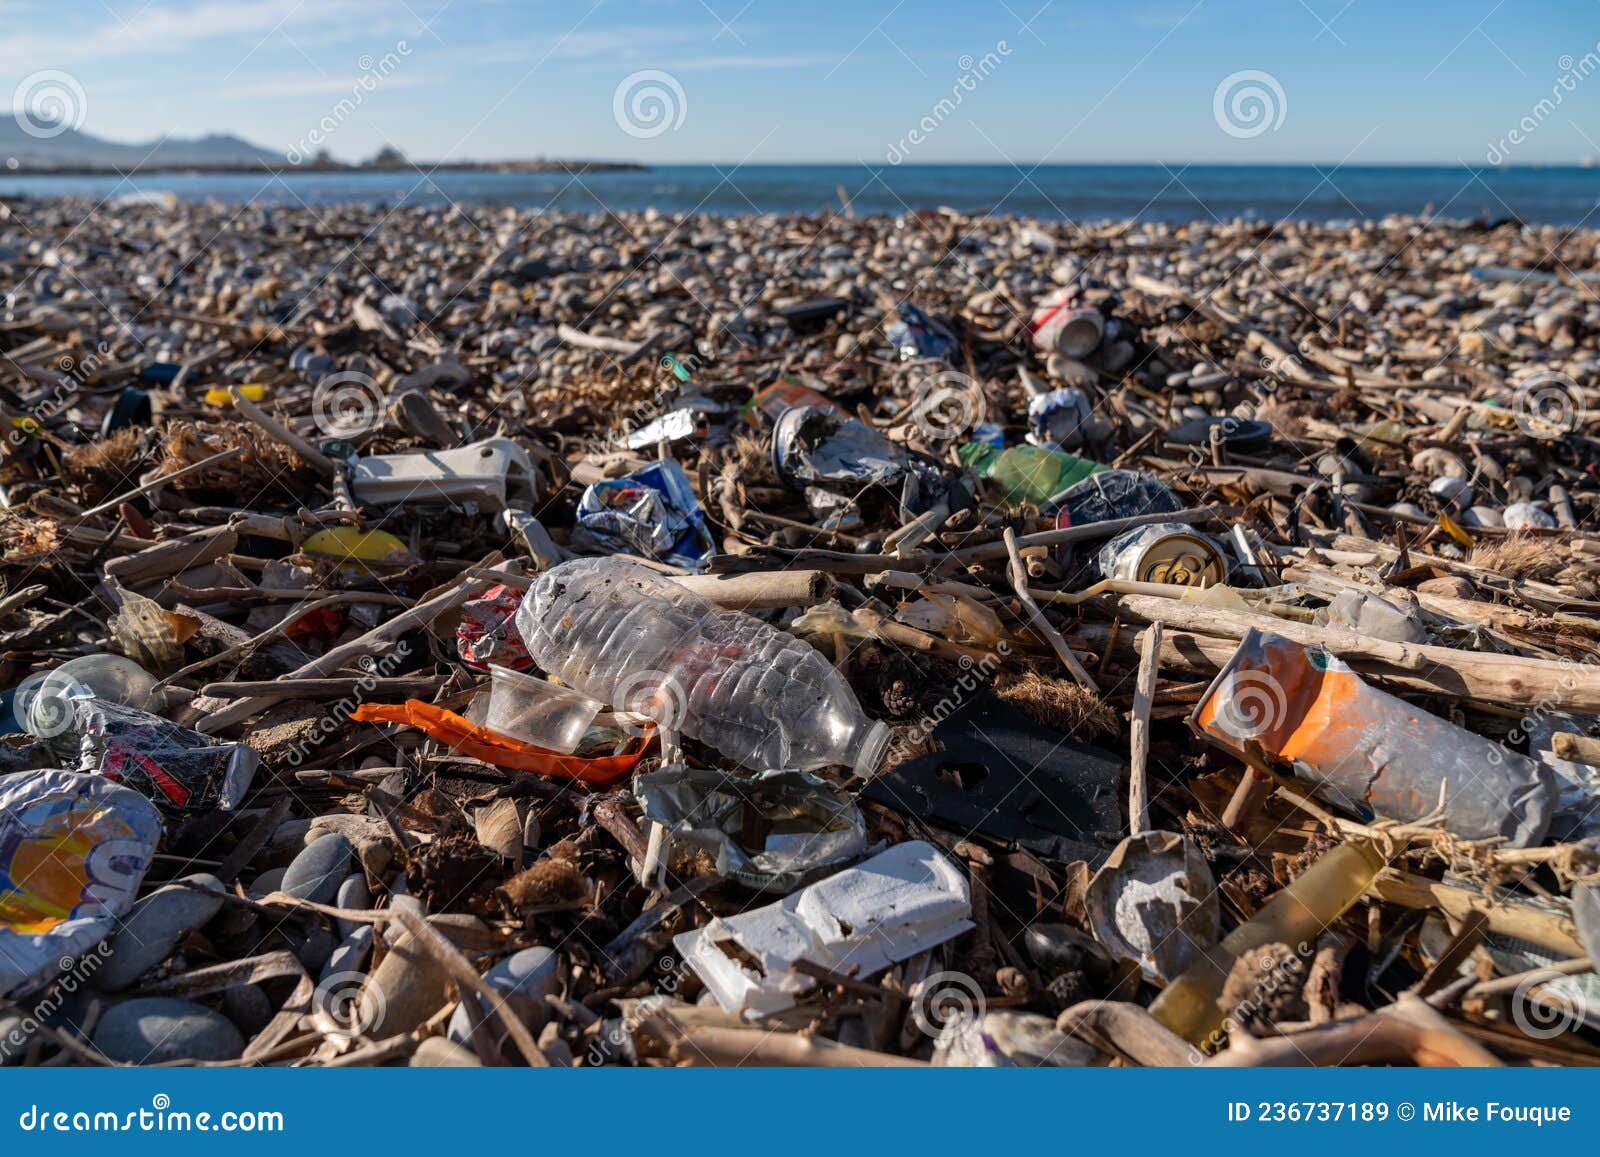 Garbage And Waste On The Beach Stock Image Image Of Scrap Ecology